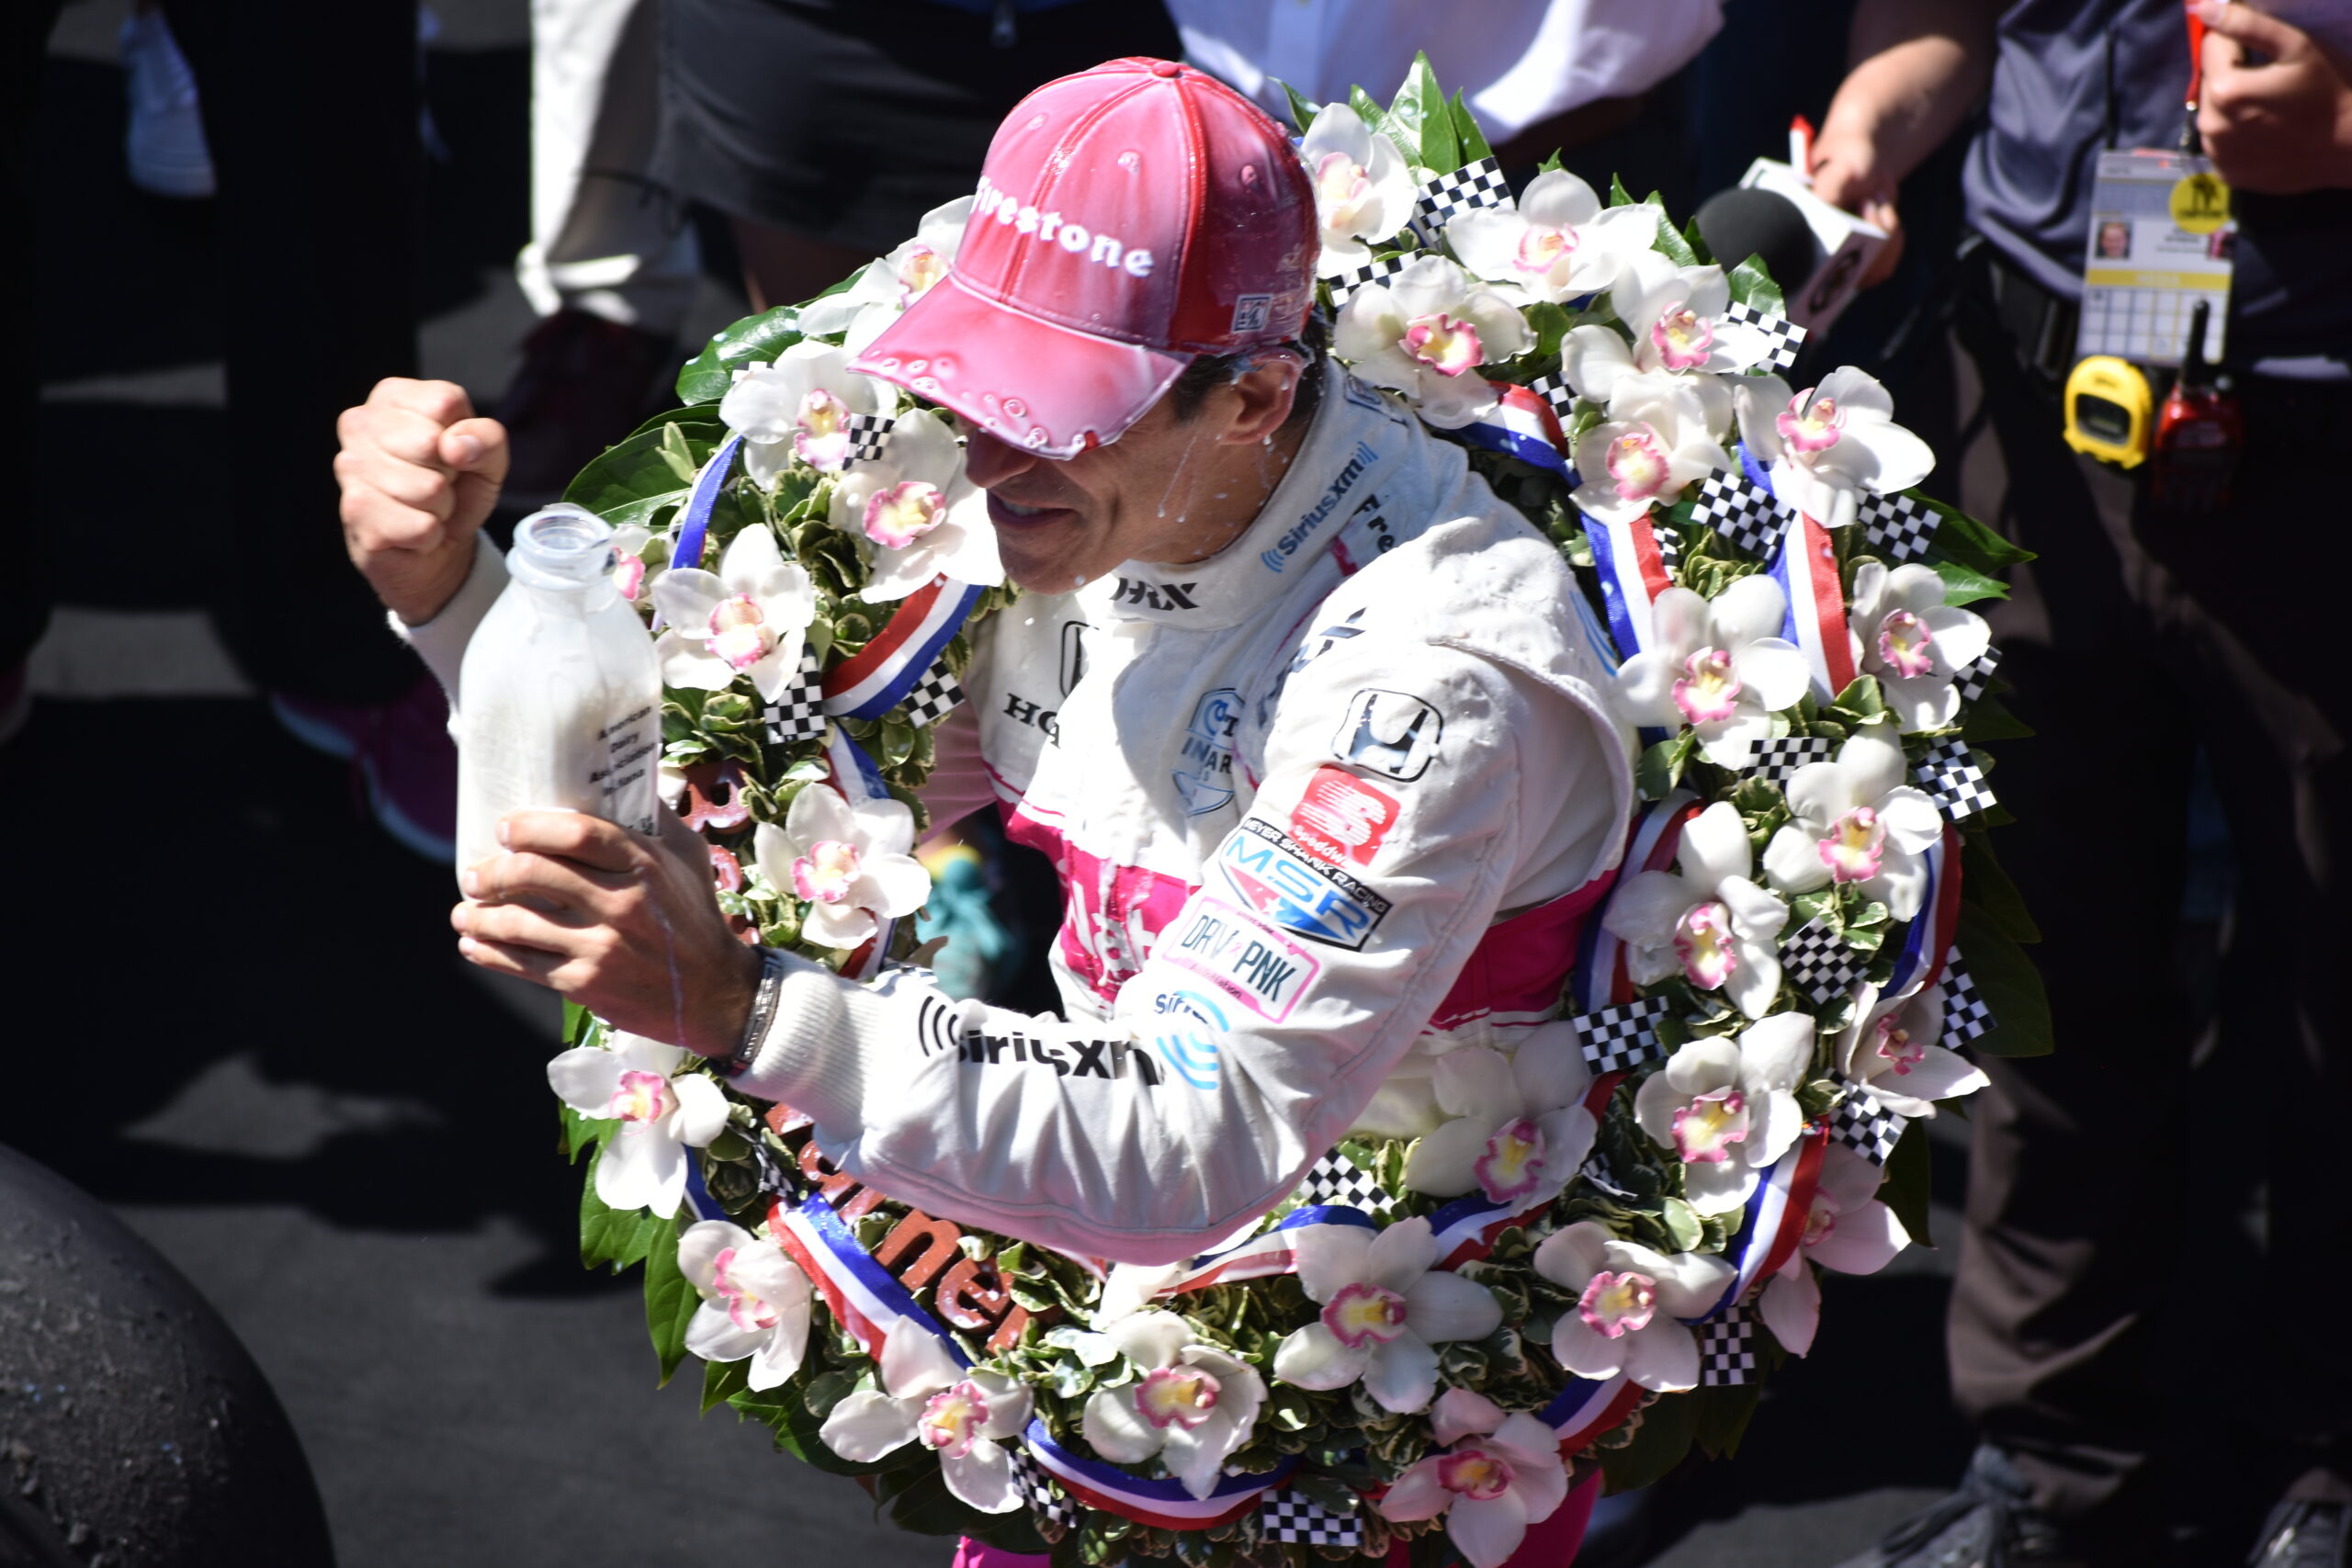 All things considered, Helio Castroneves made for a magical moment at Indy. (Photo: Luis Torres/The Podium Finish)